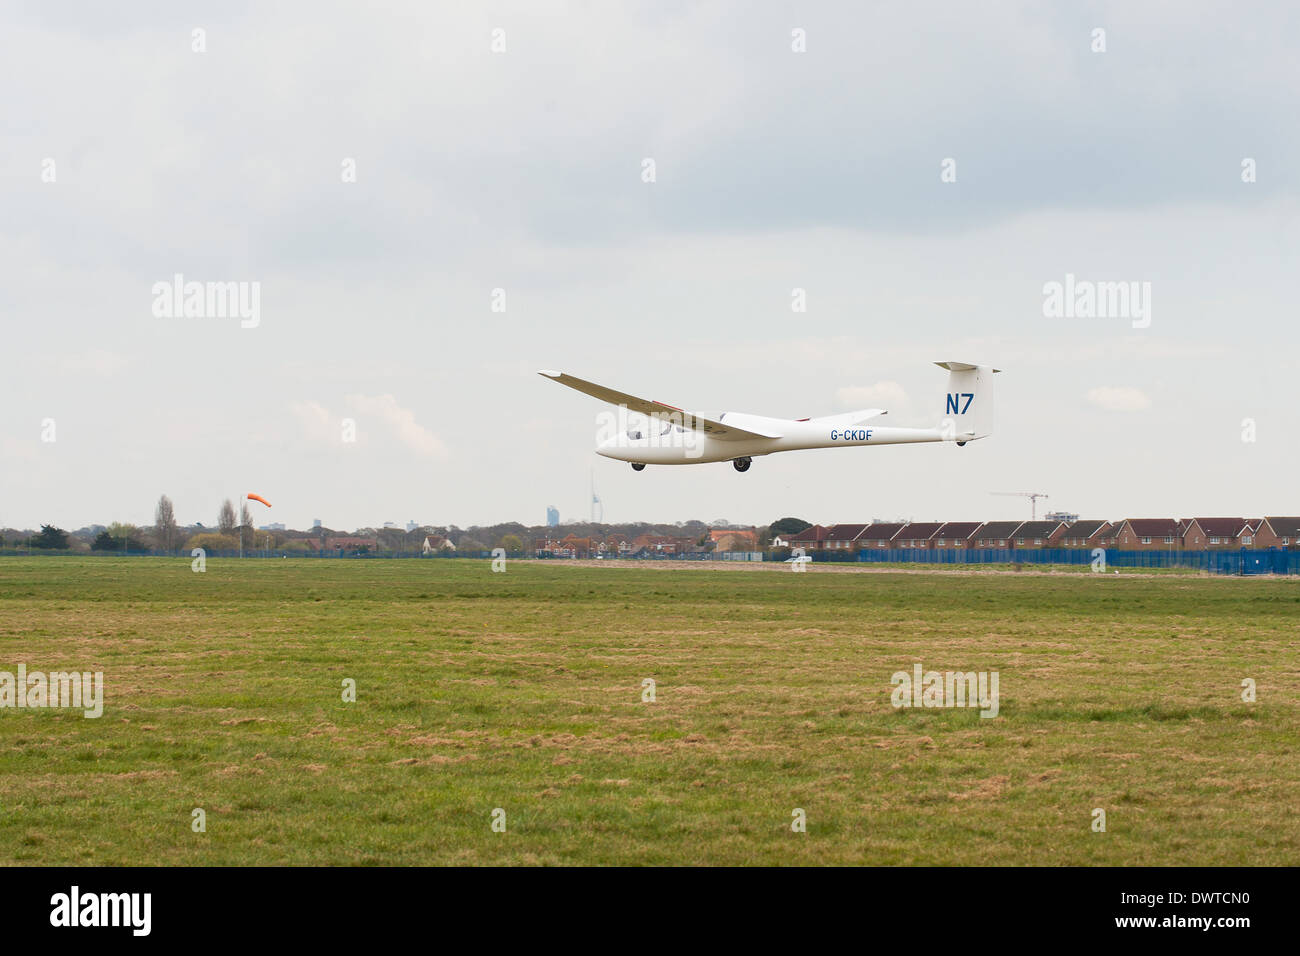 Glider landing at airfield, Lee on Solent Stock Photo